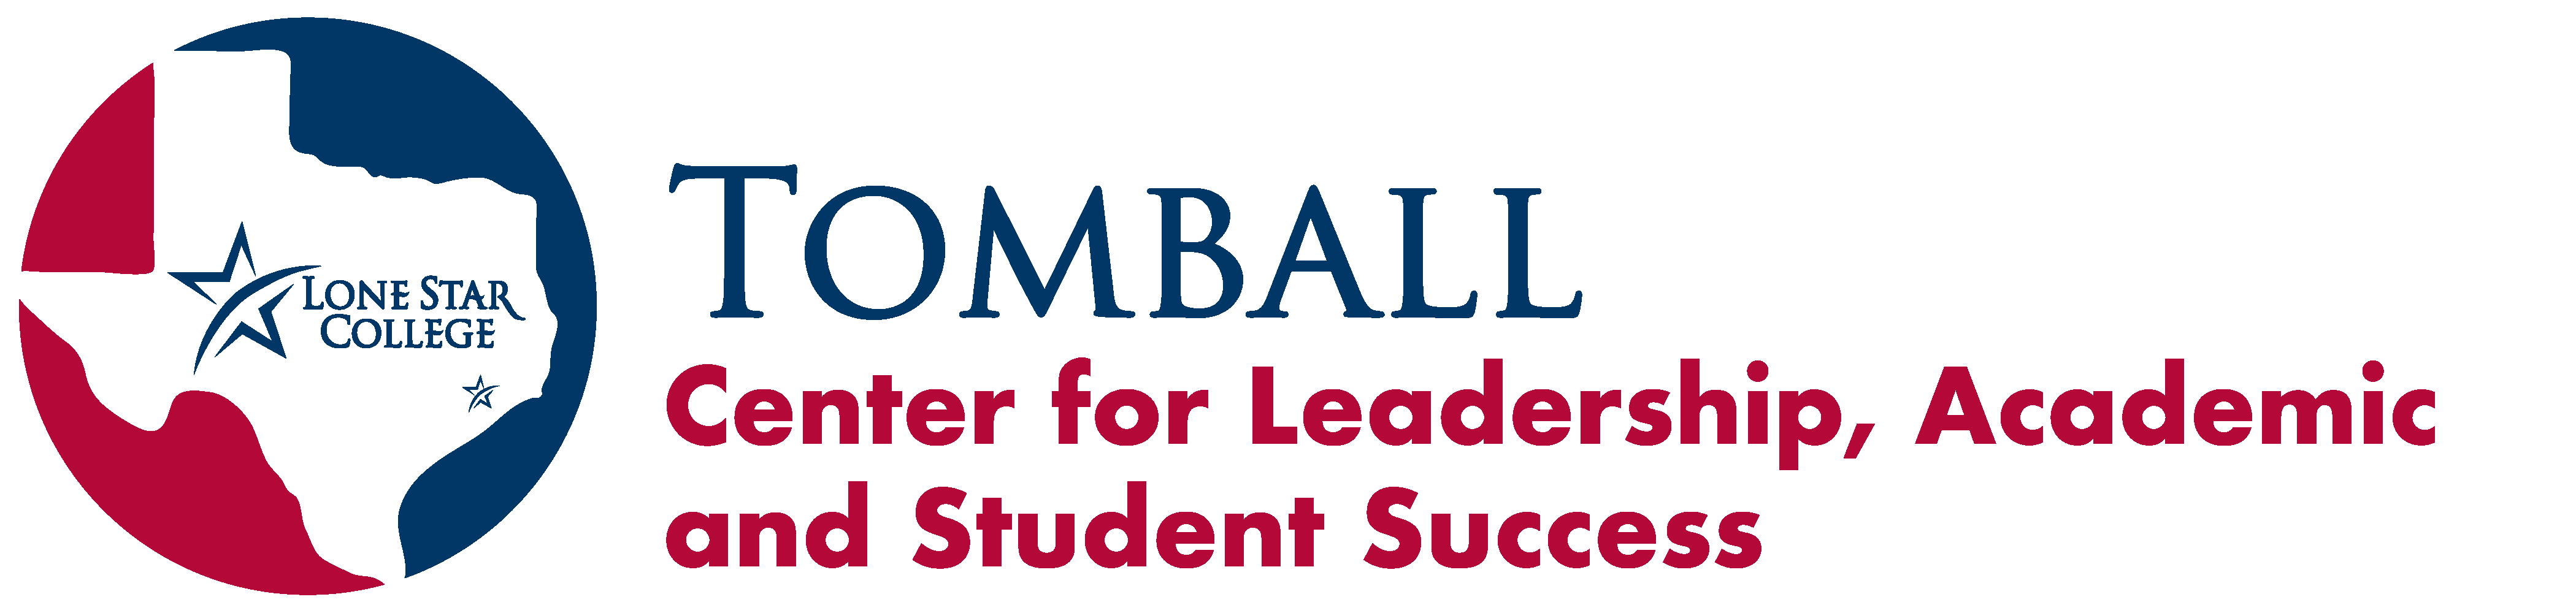 Lone Star College-Tomball Center for Leadership, Academic and Student Success